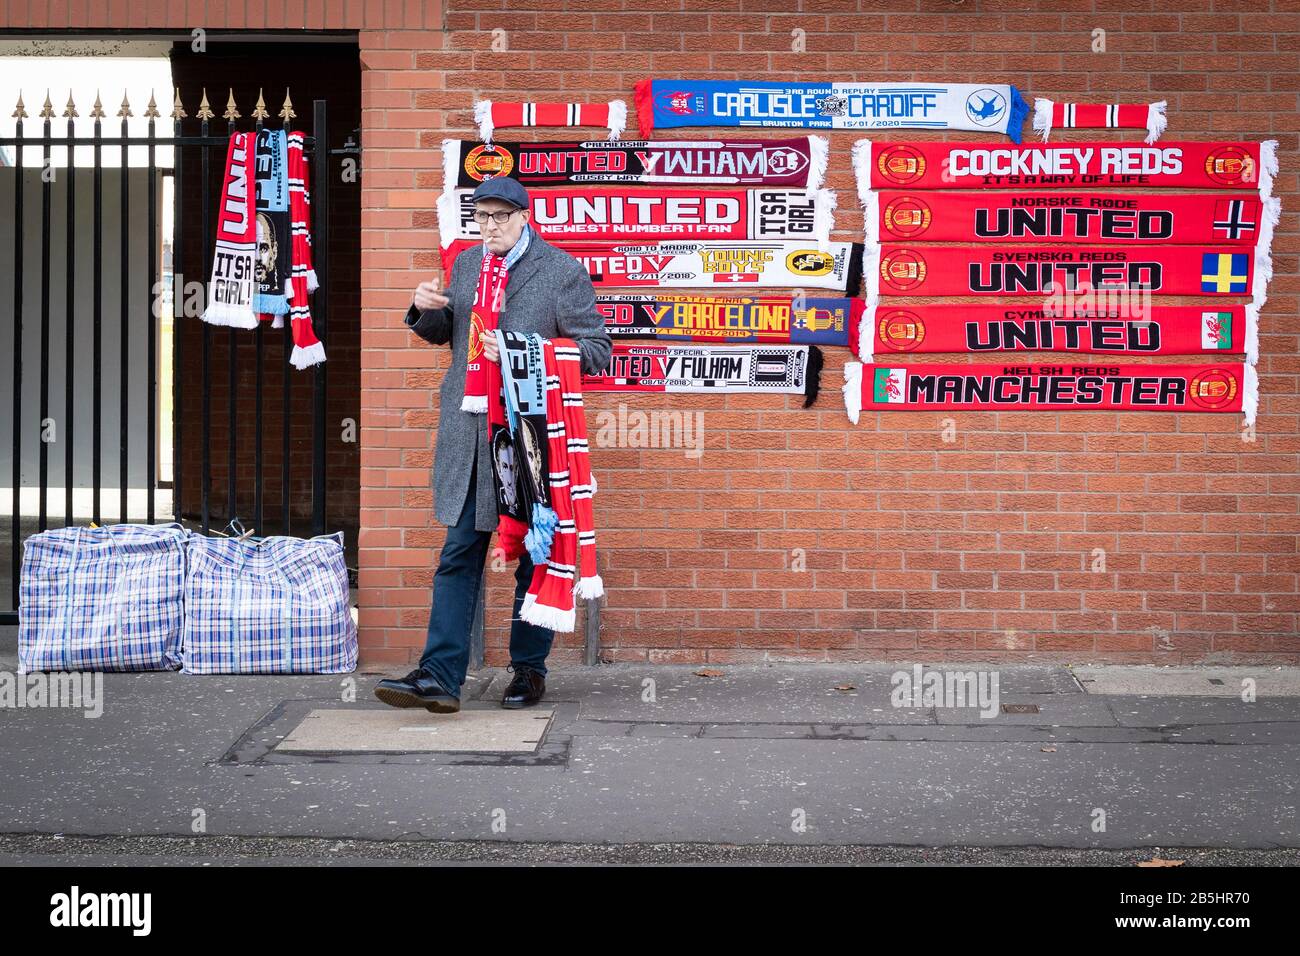 Manchester, UK. 08th Mar, 2020. The second derby of the season sees Manchester City away at Old Trafford where supporters have been gathering since early afternoon. Credit: Andy Barton/Alamy Live News Stock Photo